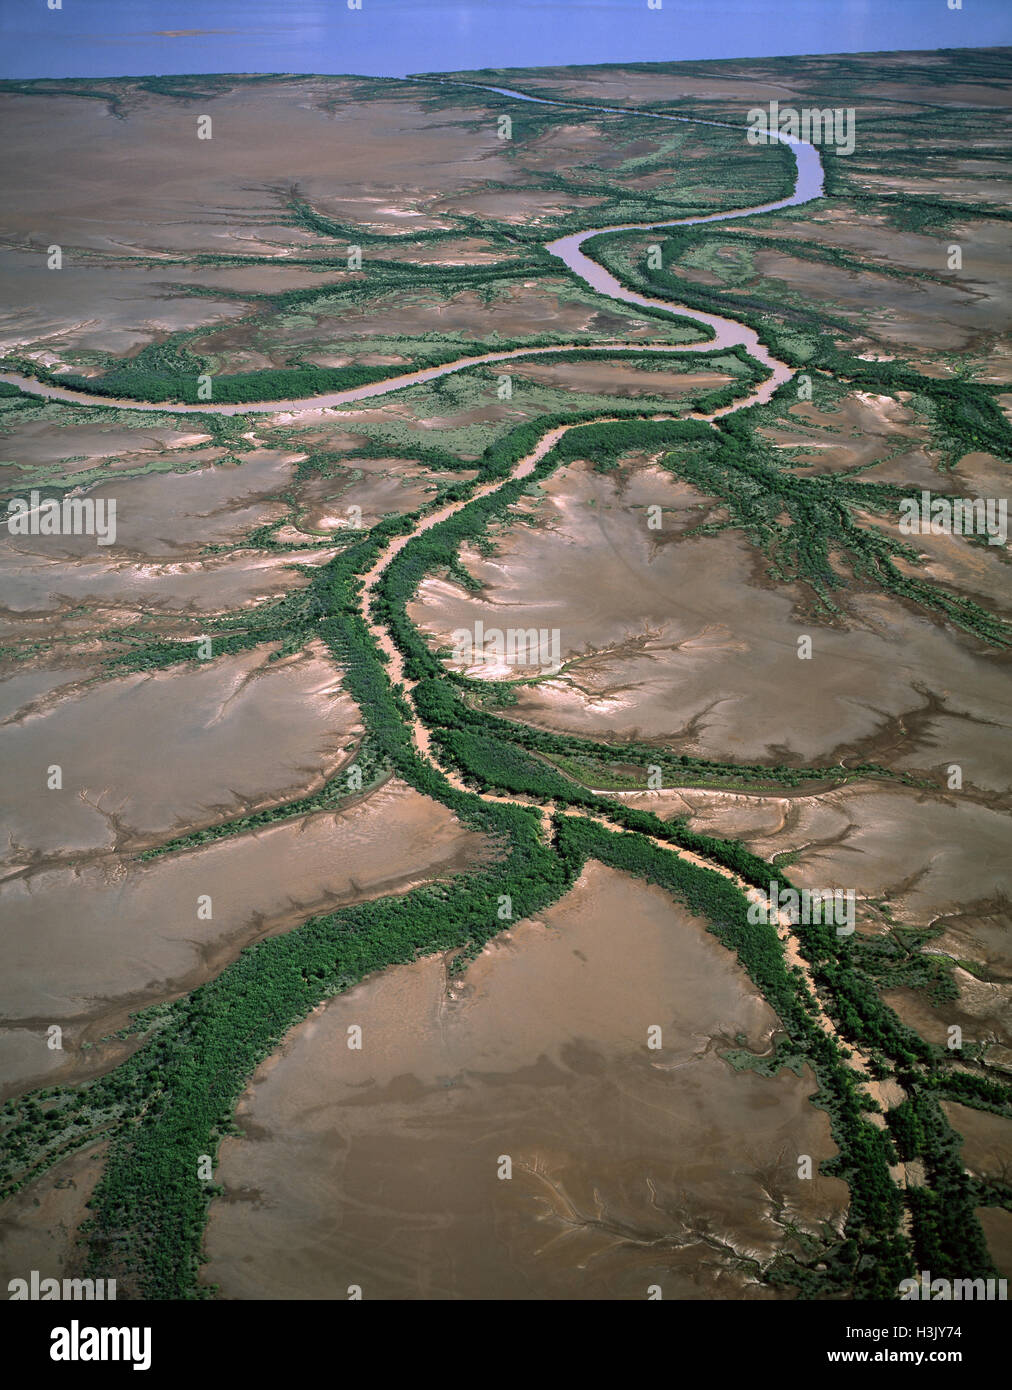 King Sound near Derby: tidal flats, mangrove-lined river and dendritic drainage, Stock Photo